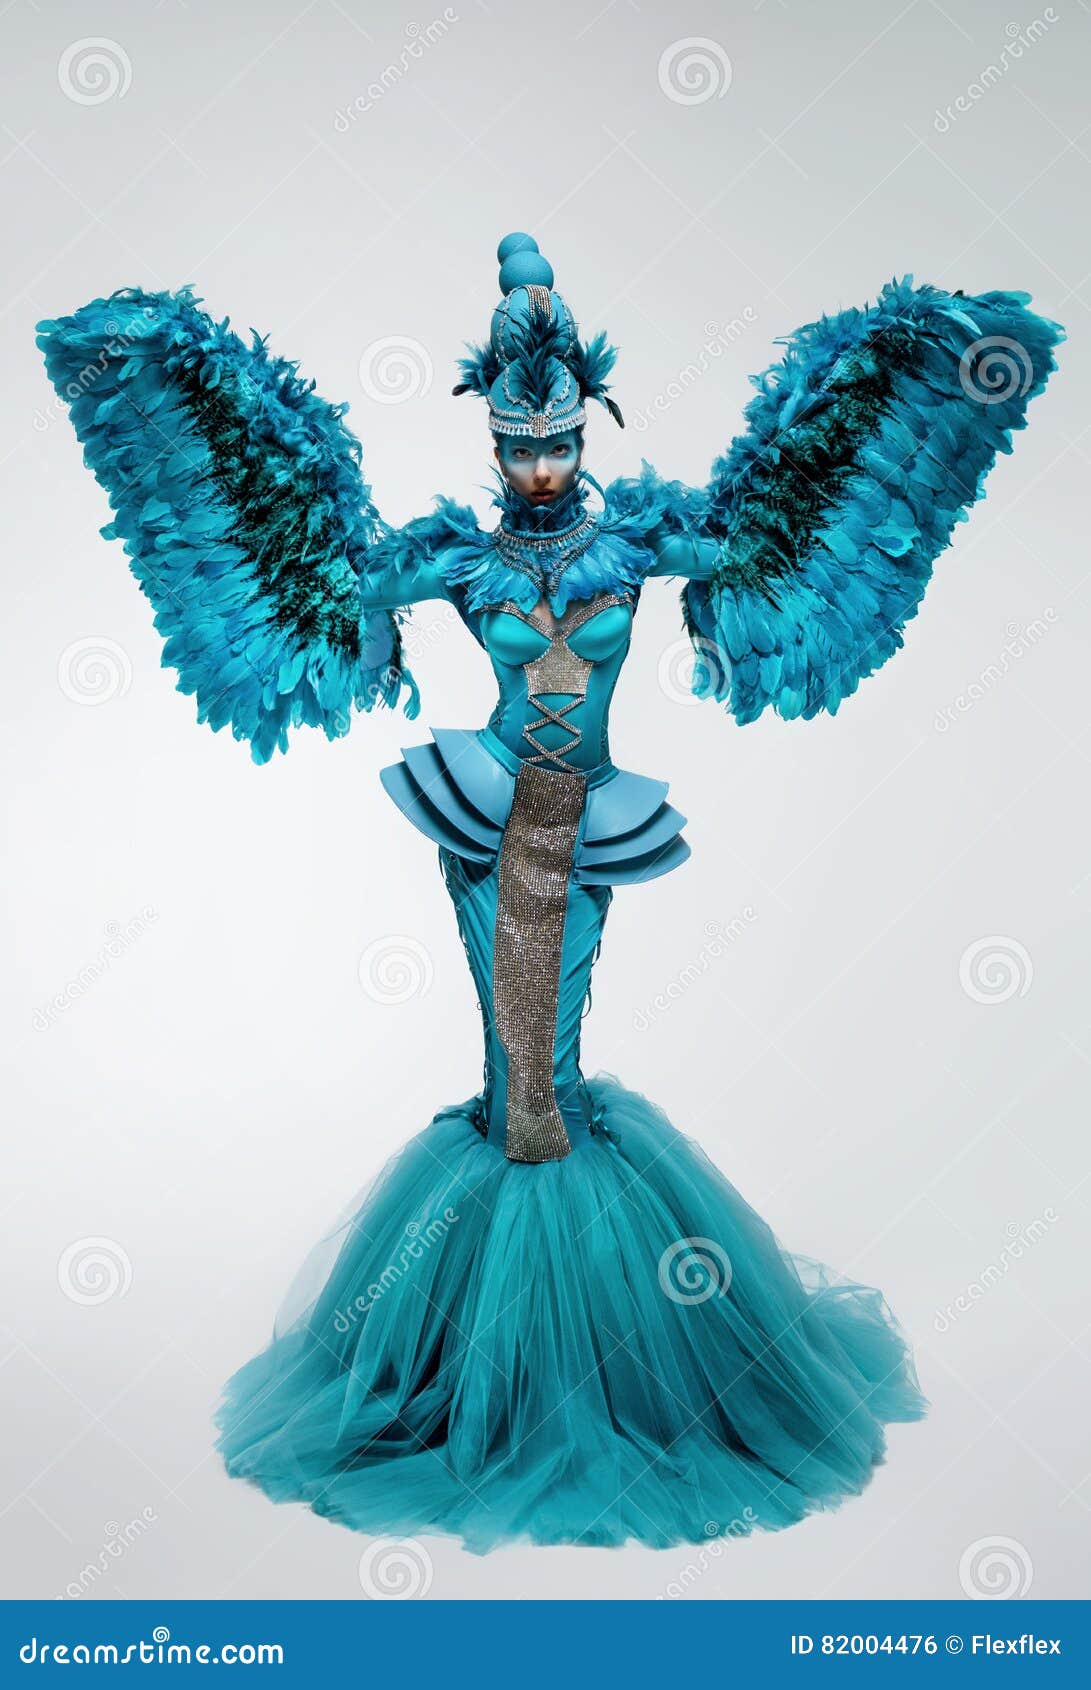 woman in fantasy costume with feather sleeves